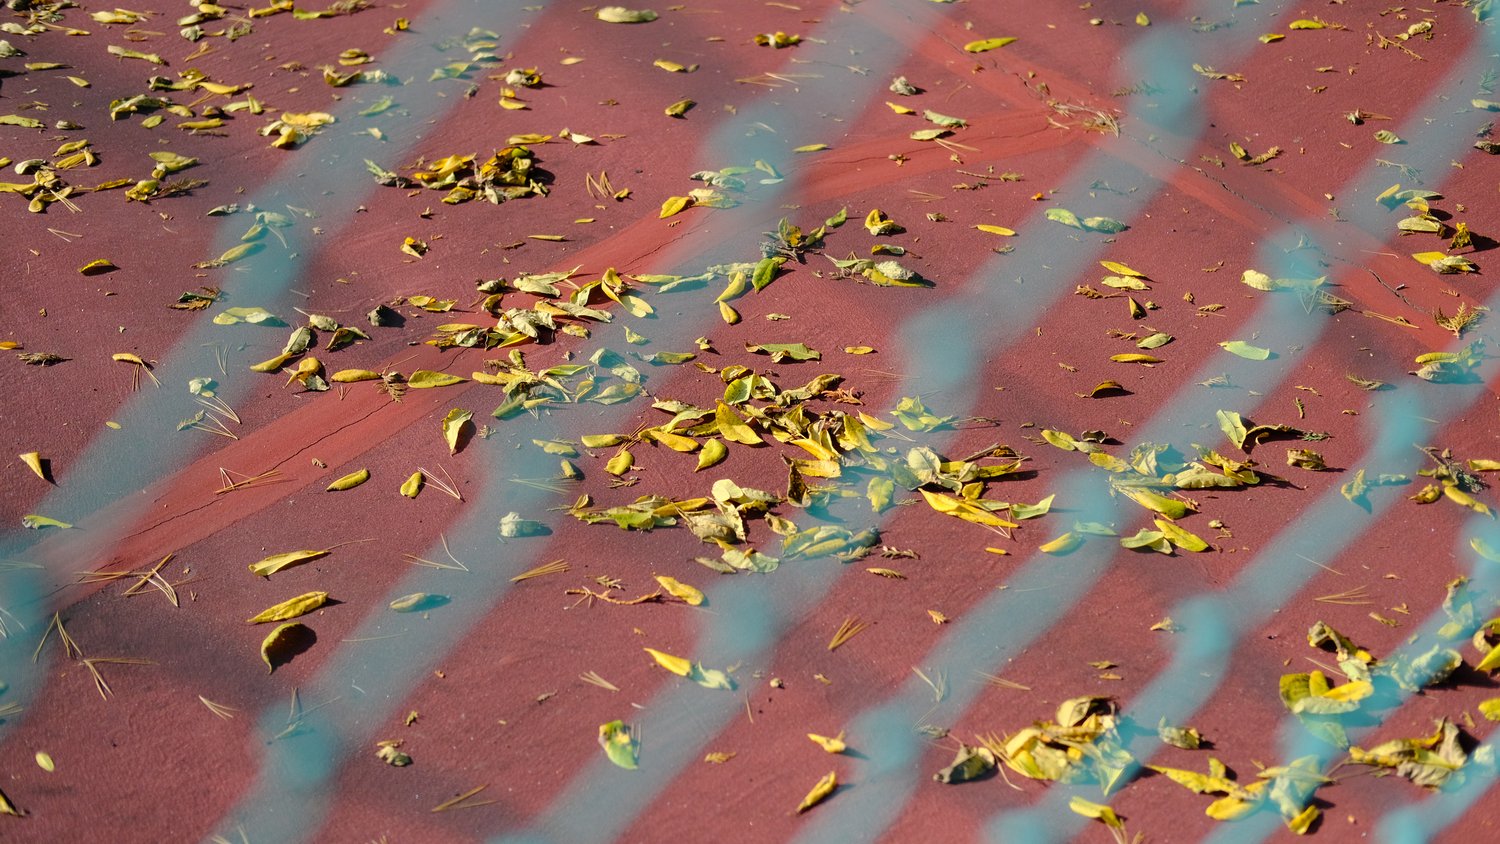 Fallen leaves on tennis court, seen through chain-link fence.